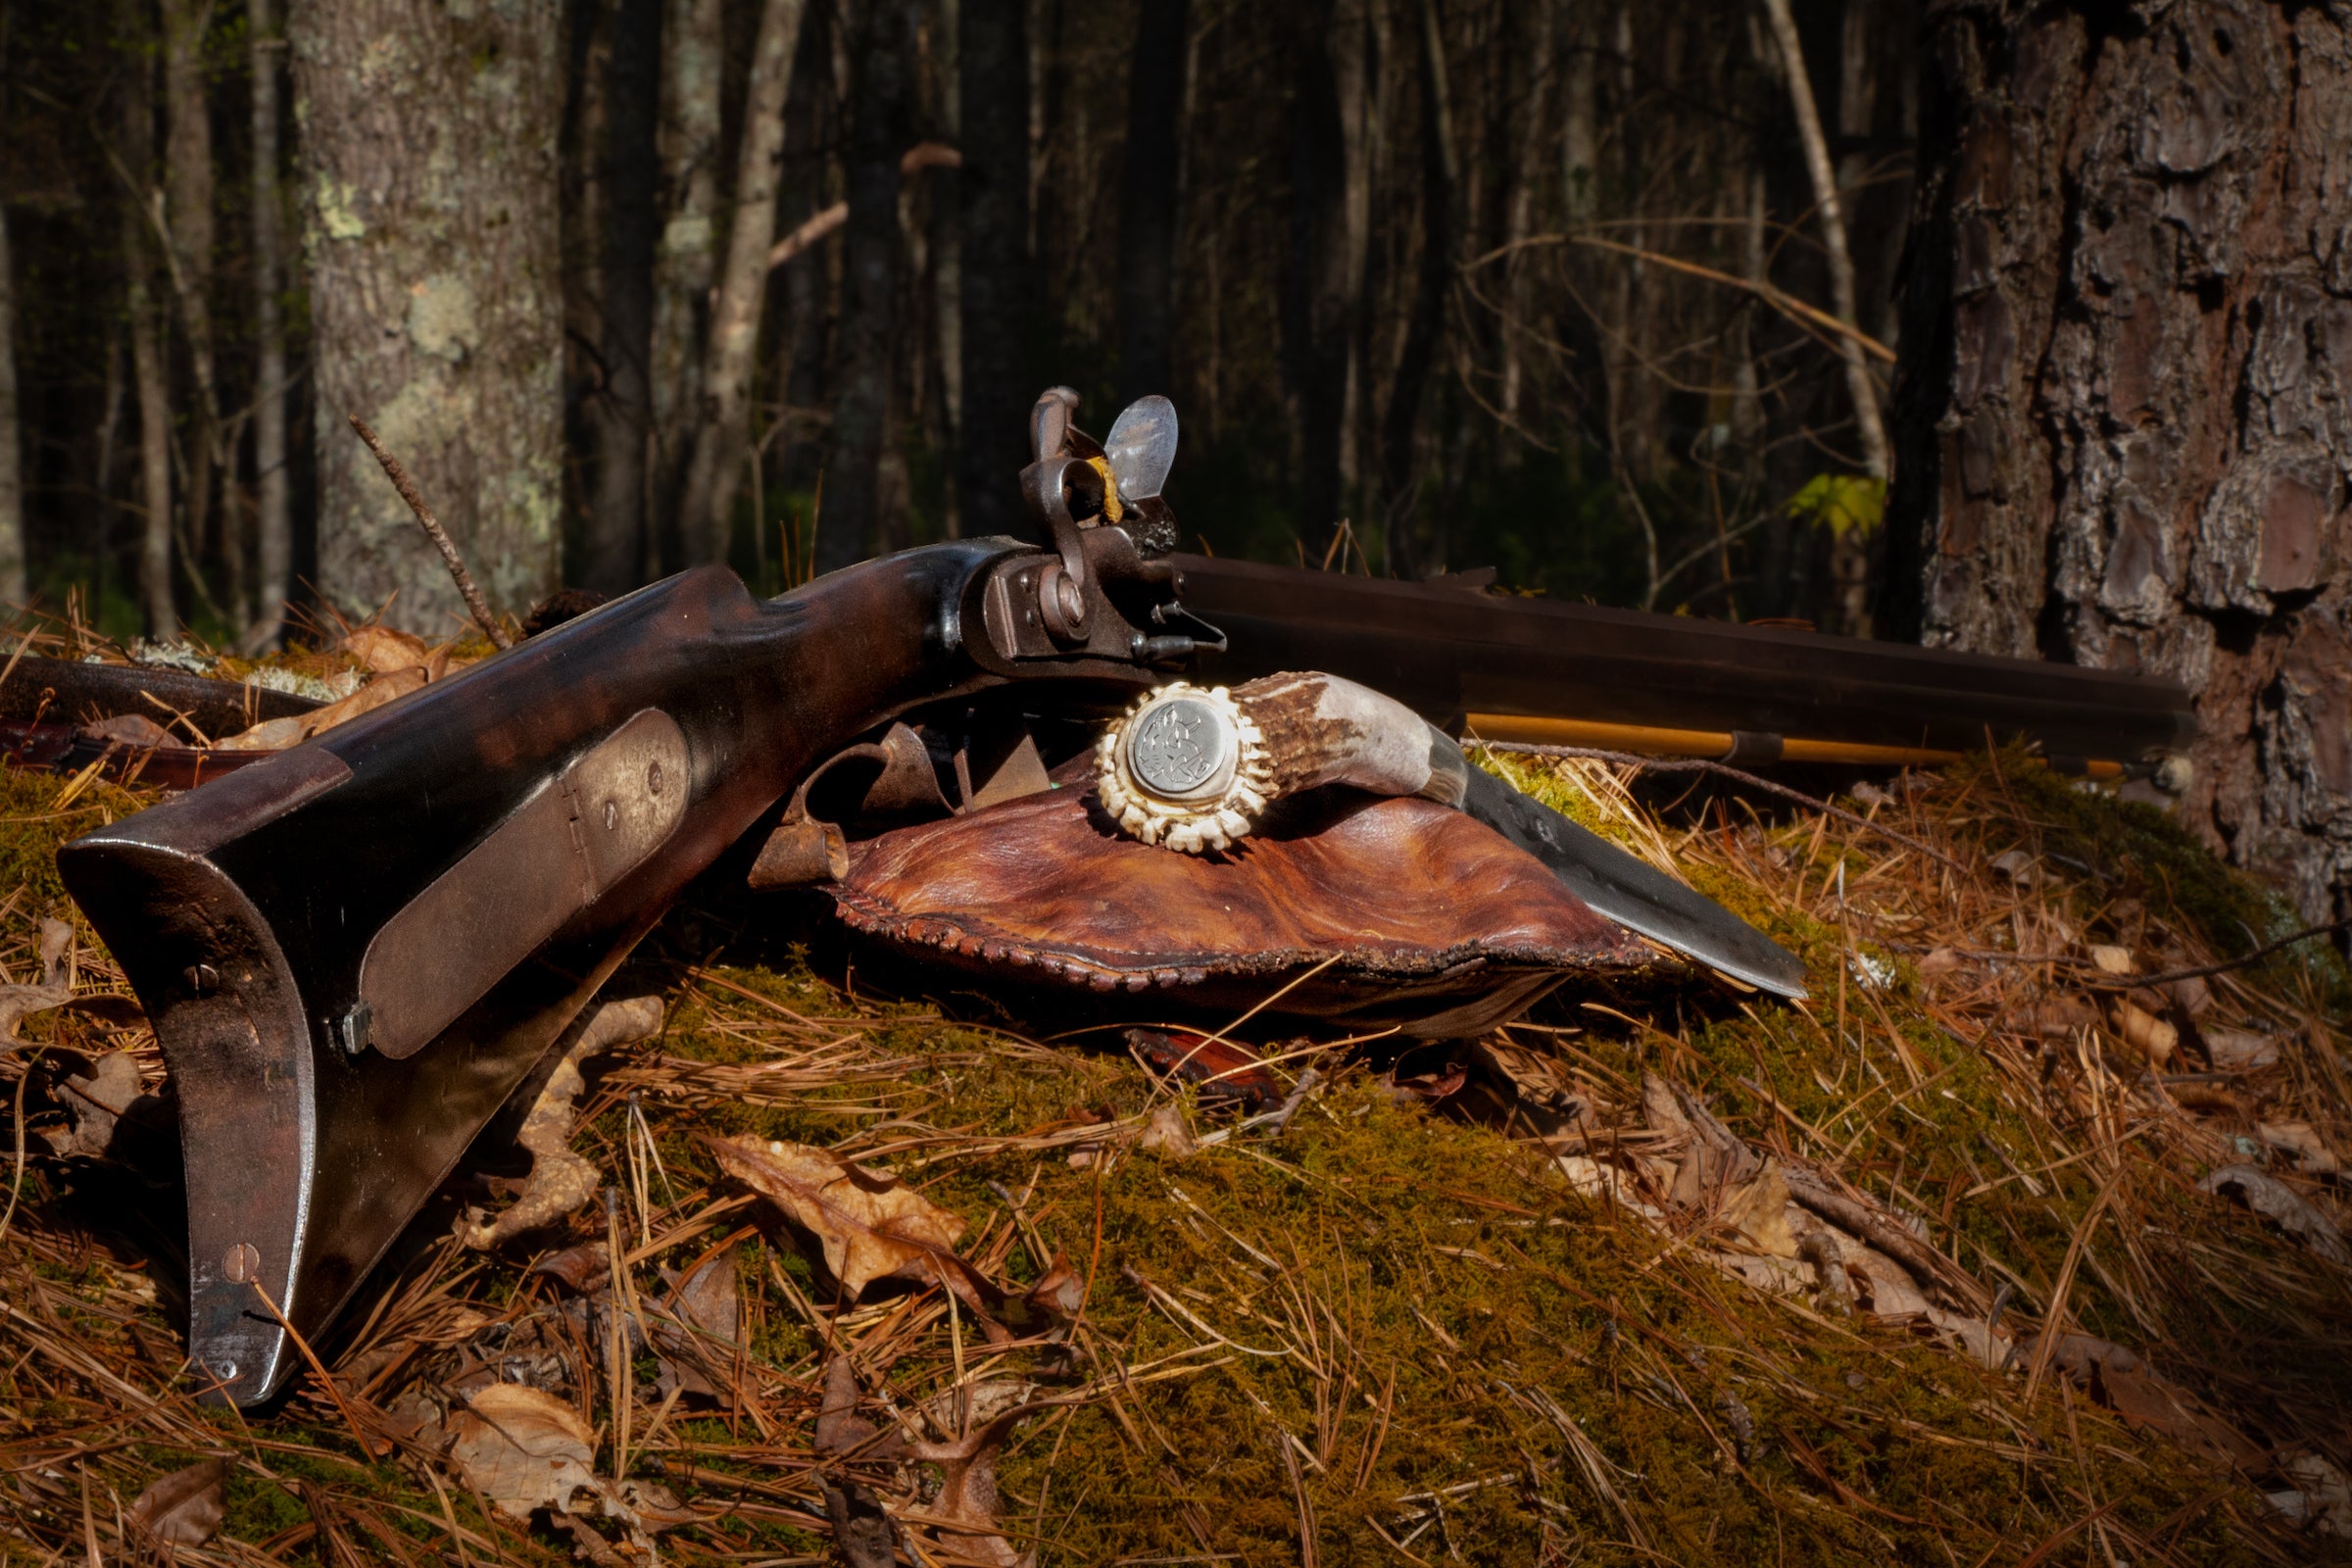 A traditional hunter's kit on the floor of the woods.